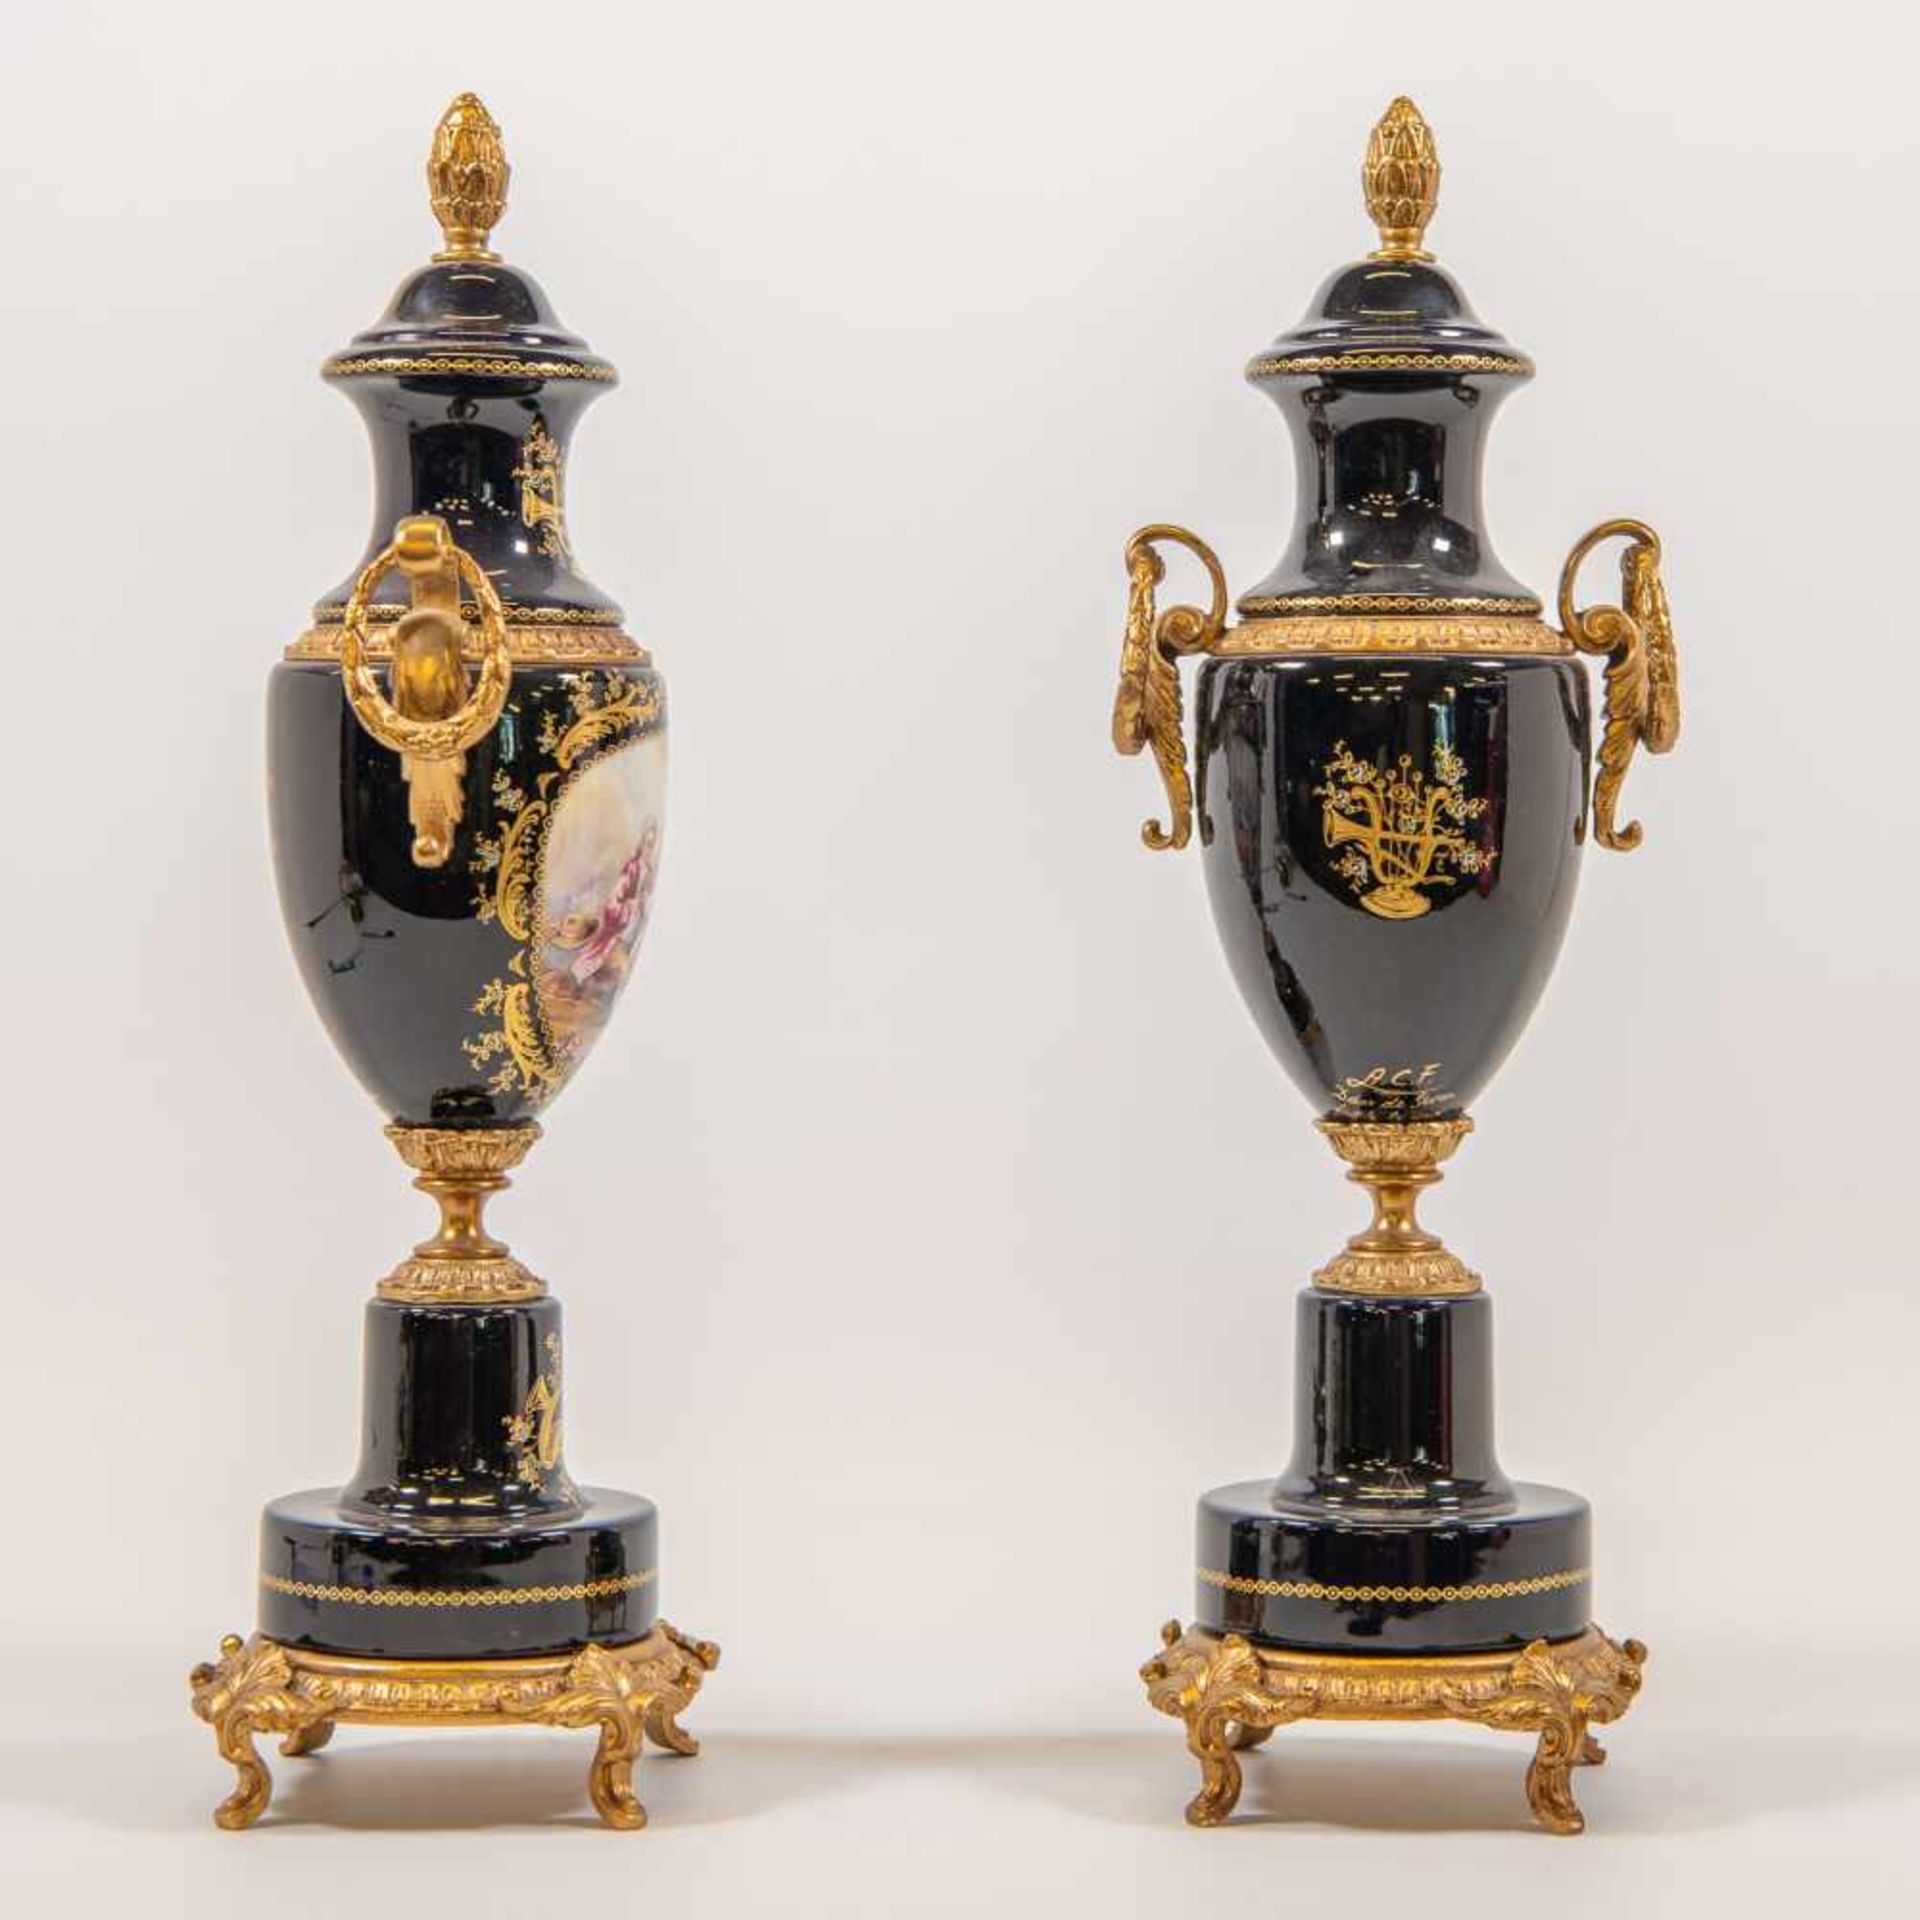 A.C.F. Decor de Sèvres, Pair of young vases, handpainted decor signed G. Rimi, bronze mounted. - Image 2 of 7